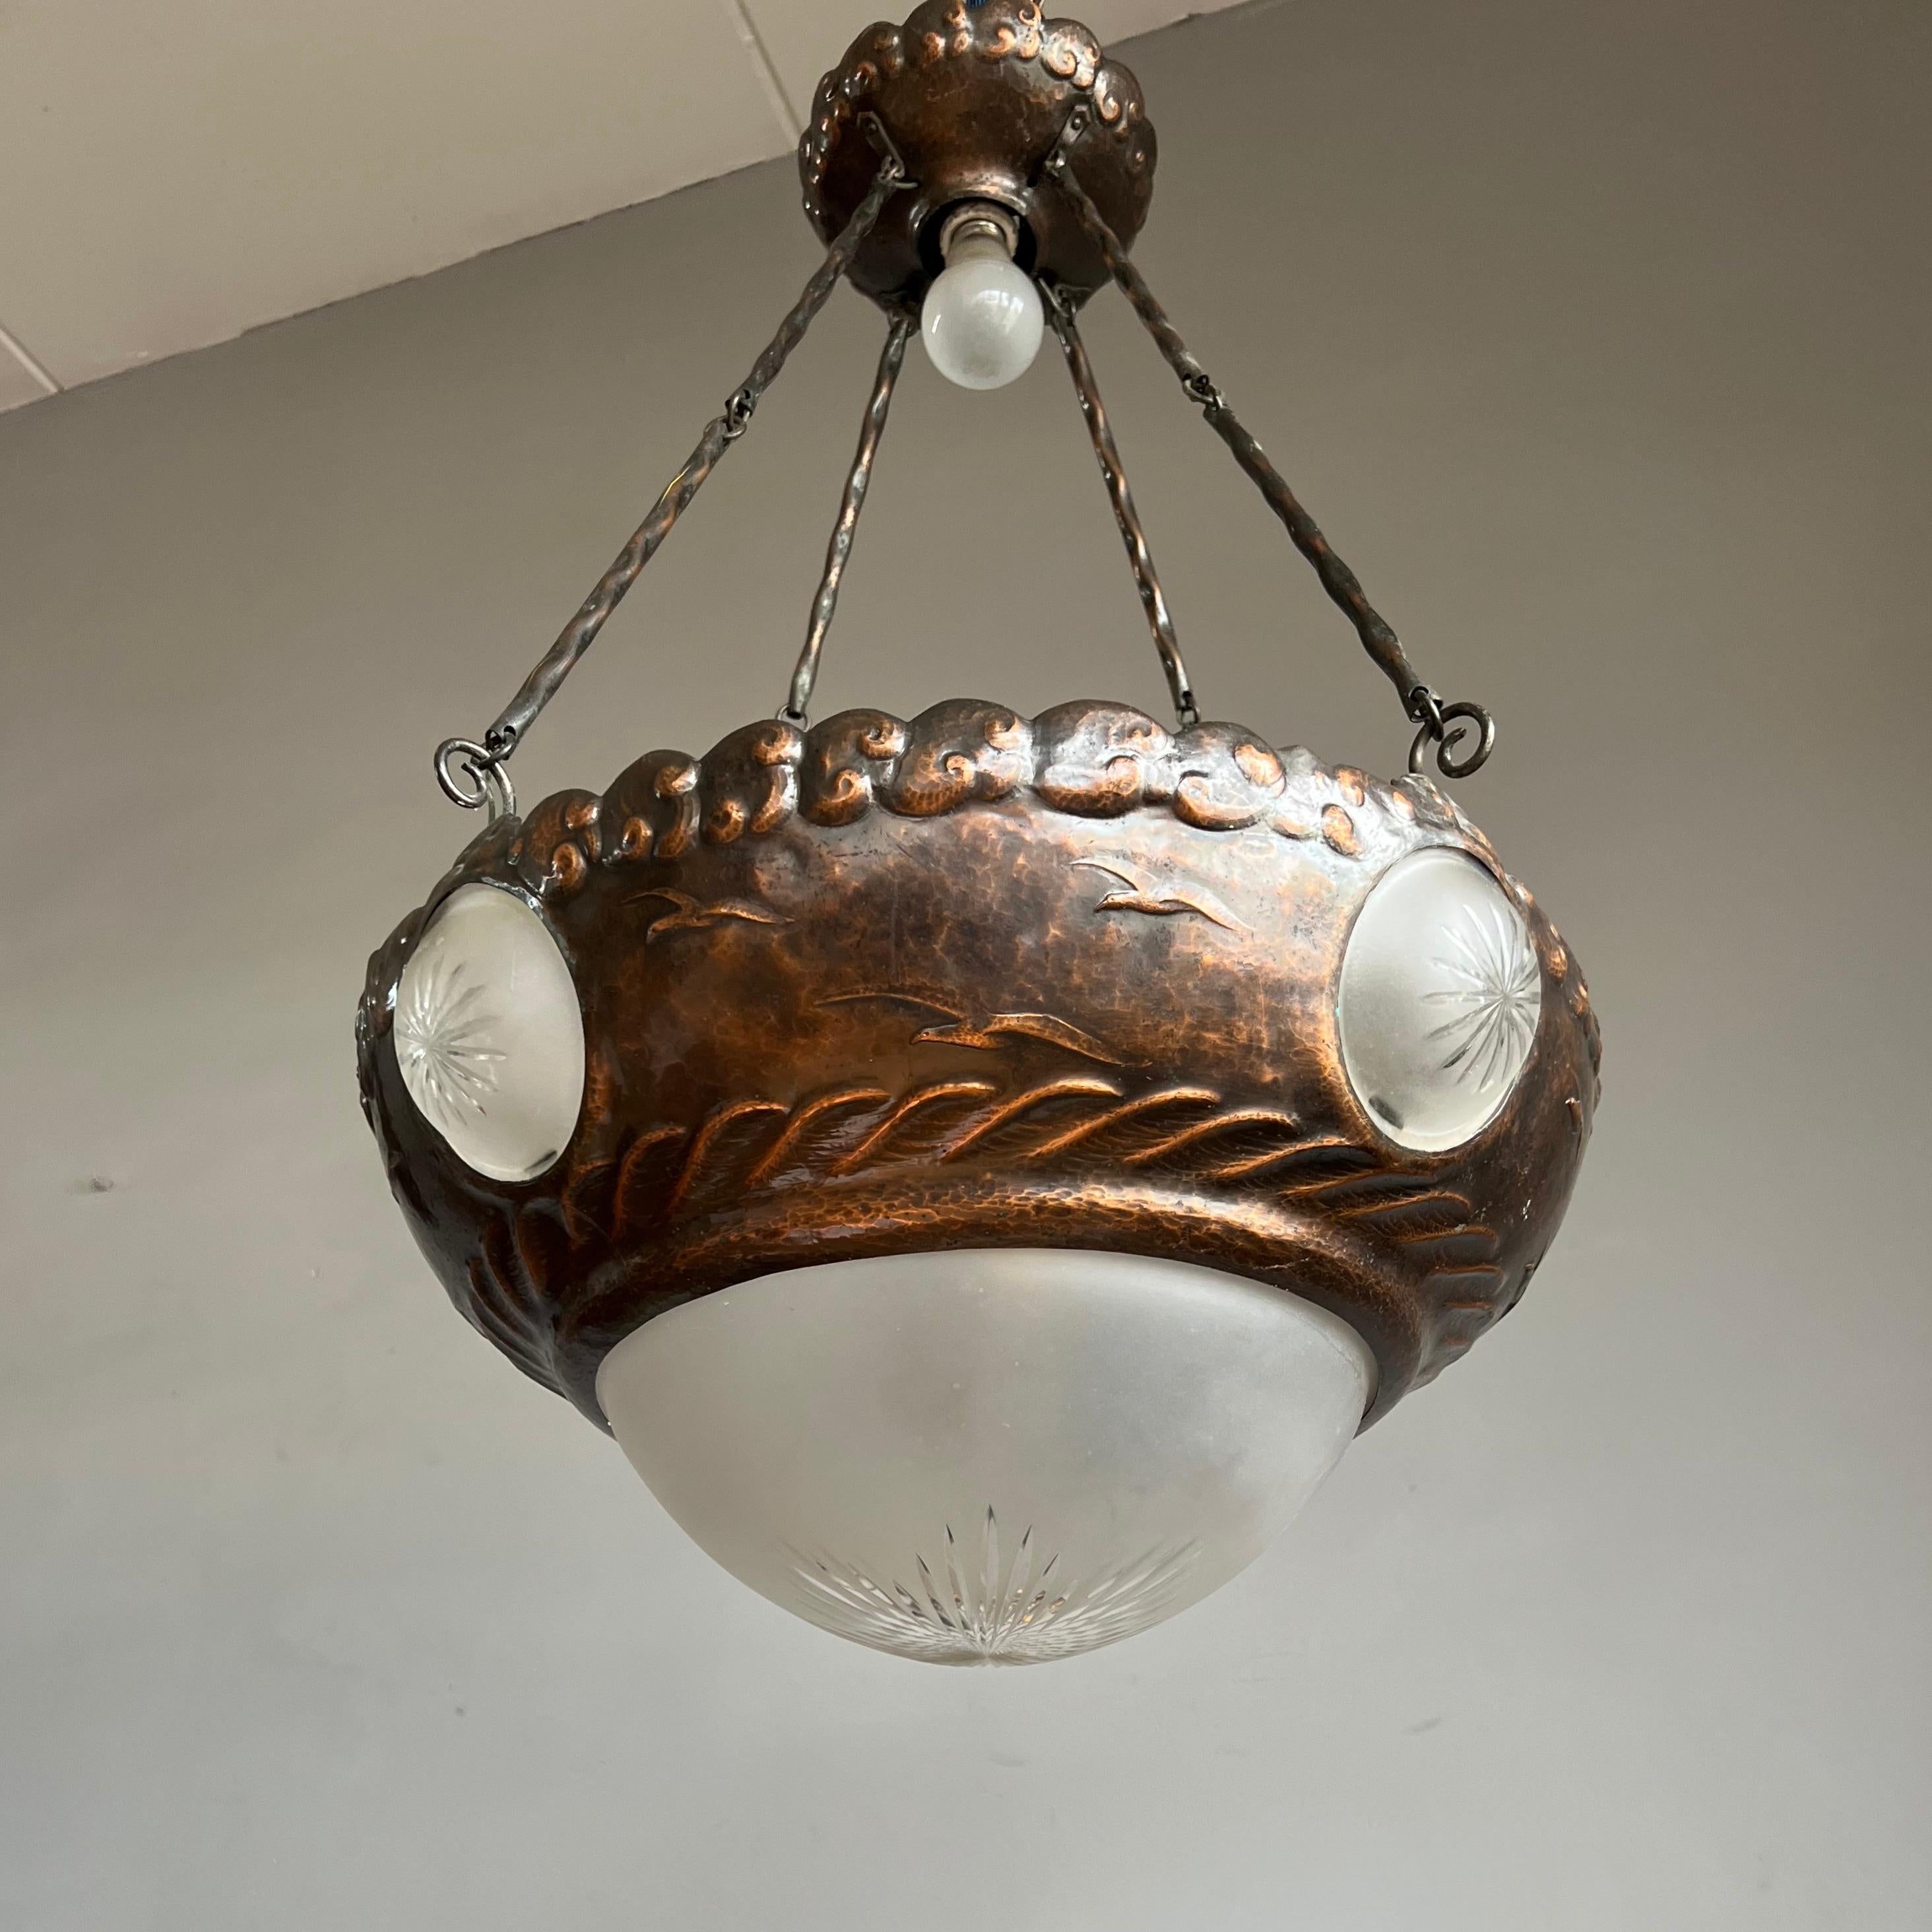 Stunning, sizeable and highly decorative Arts & Crafts light fixture.

This gorgeous, six-light chandelier is another one of our recent great finds. Inspired by the beauty of nature and wildlife, Arts & Crafts designers and craftsman around the